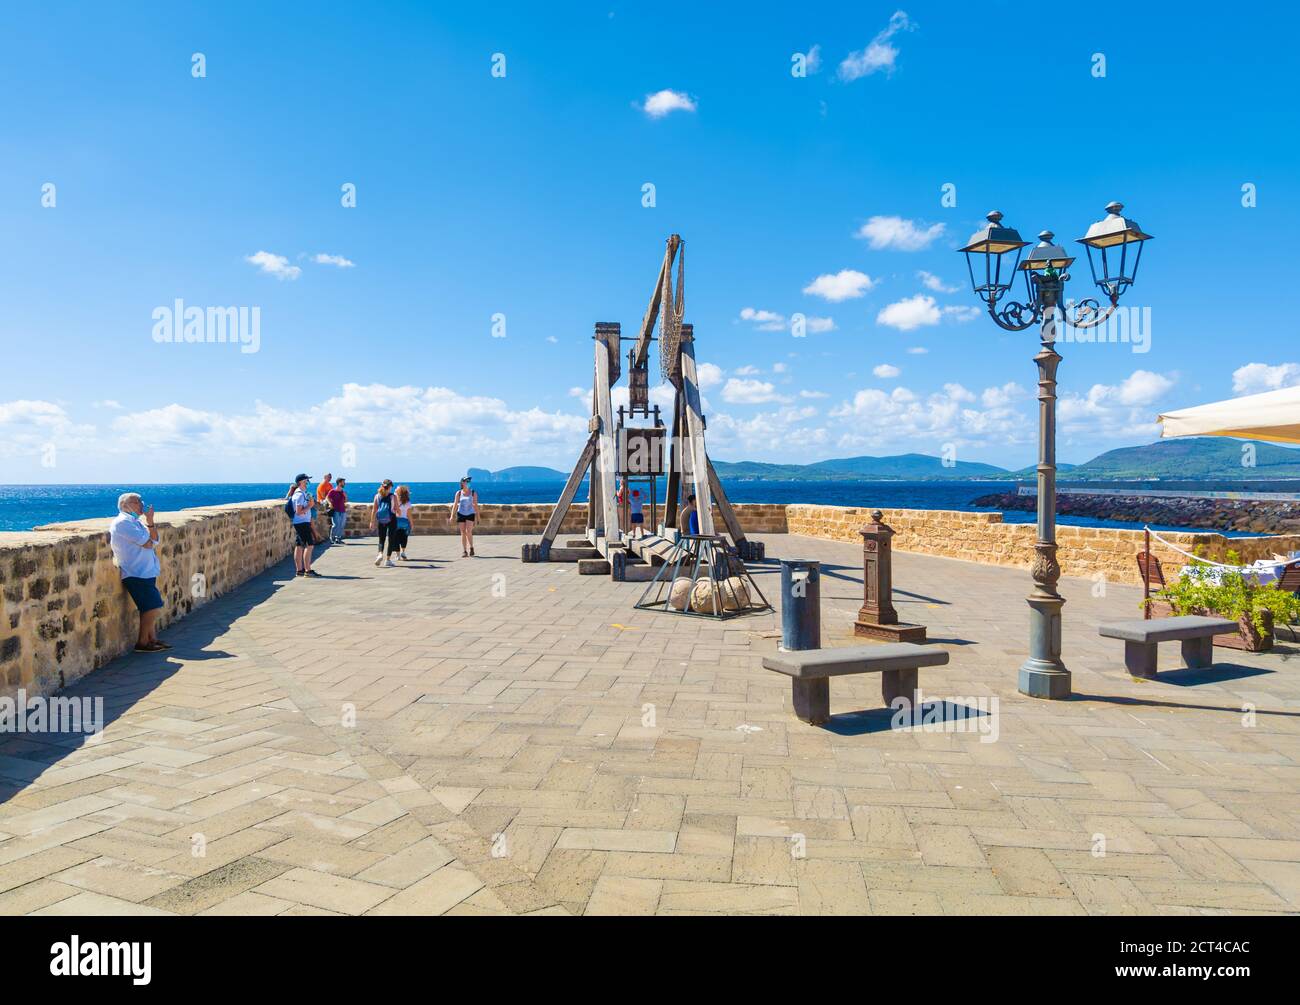 Alghero (Italy) - The marine and touristic city on the in Sardegna island, catalan colony with spanish culture. Here a view of historic center. Stock Photo